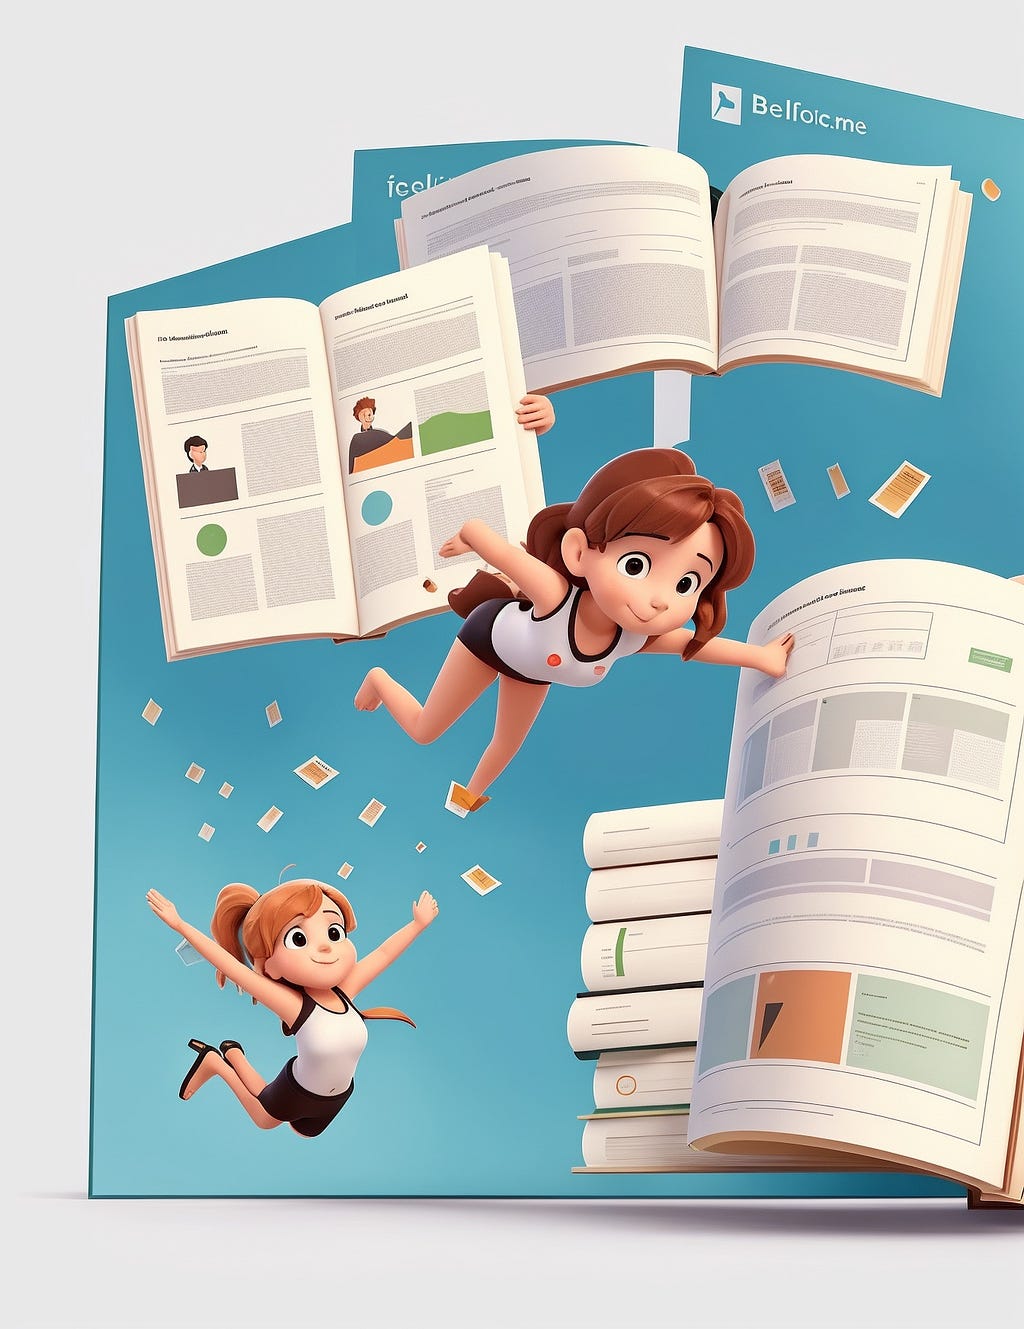 Design an image of a person diving into a pool of documentation pages, with each page representing a different aspect of Salesforce B2C Commerce. Include labels like “API,” “Development,” and “Best Practices.”